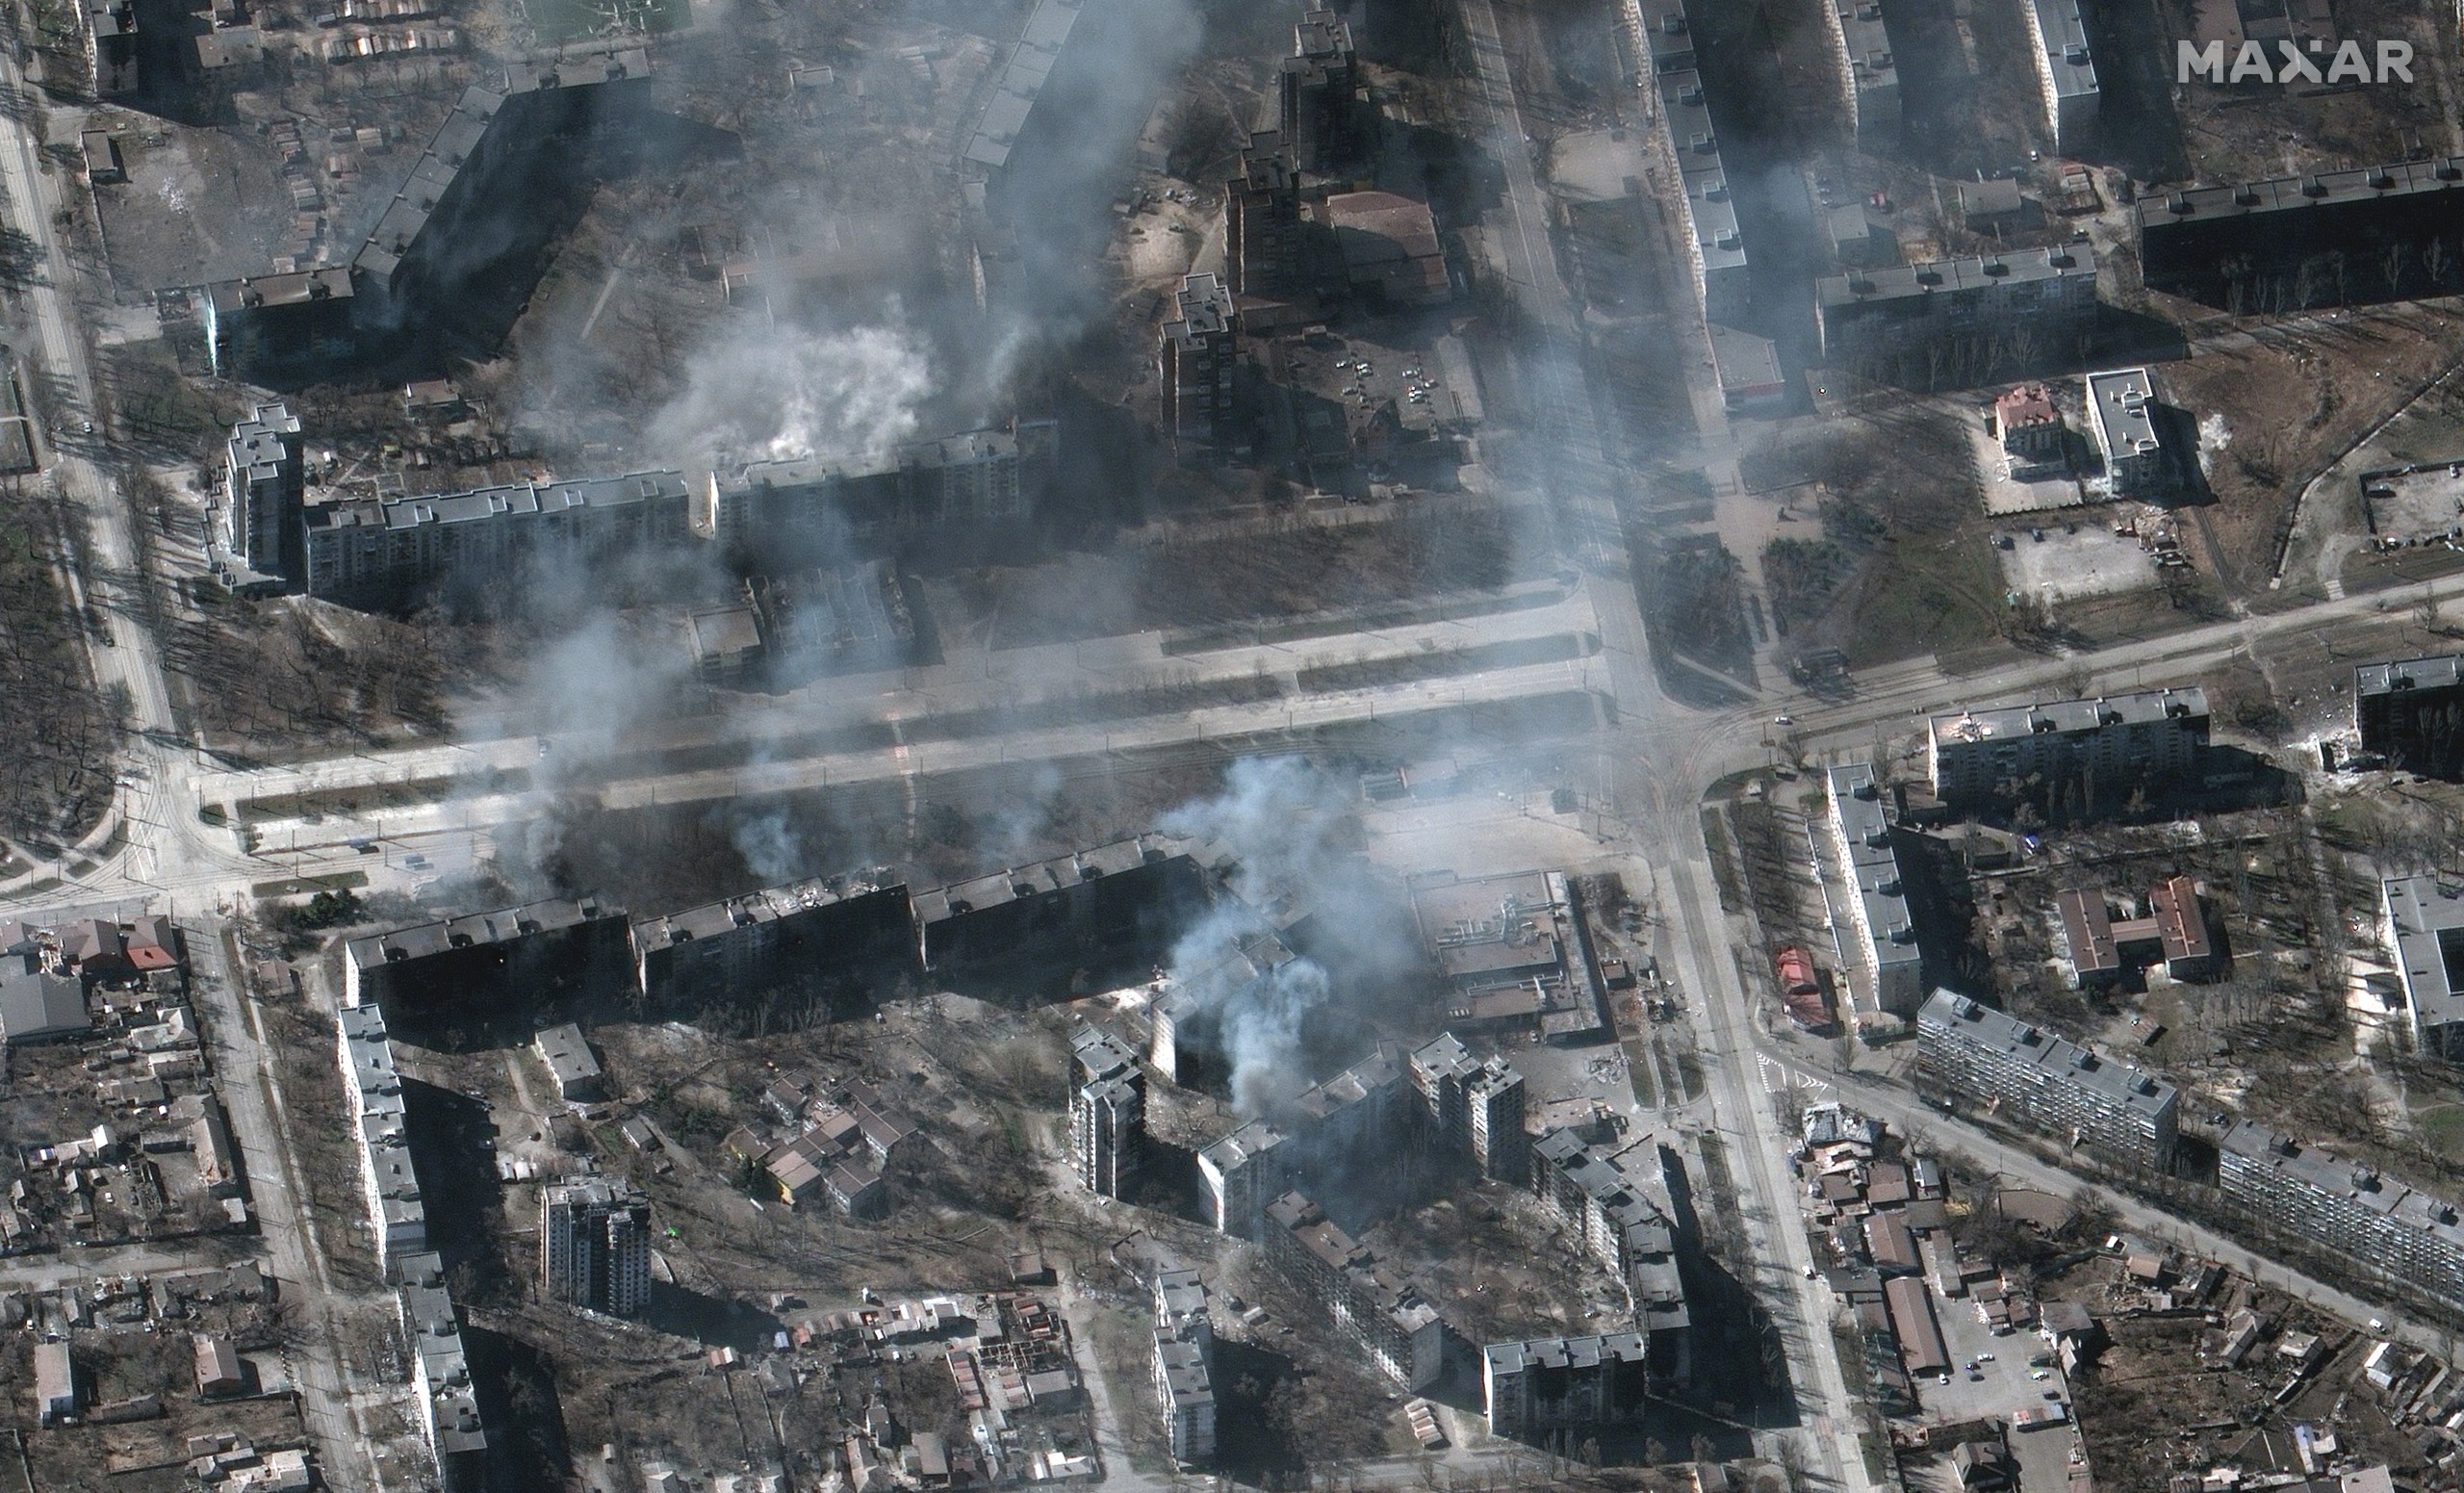 epa09843367 A handout satellite image made available by Maxar Technologies shows buildings on fire, in Mariupol, Ukraine, 22 March 2022.  Russian troops entered Ukraine on 24 February prompting the country's president to declare martial law and triggering a series of announcements by Western countries to impose severe economic sanctions on Russia.  EPA/MAXAR TECHNOLOGIES HANDOUT -- MANDATORY CREDIT: SATELLITE IMAGE 2022 MAXAR TECHNOLOGIES -- THE WATERMARK MAY NOT BE REMOVED/CROPPED -- HANDOUT EDITORIAL USE ONLY/NO SALES